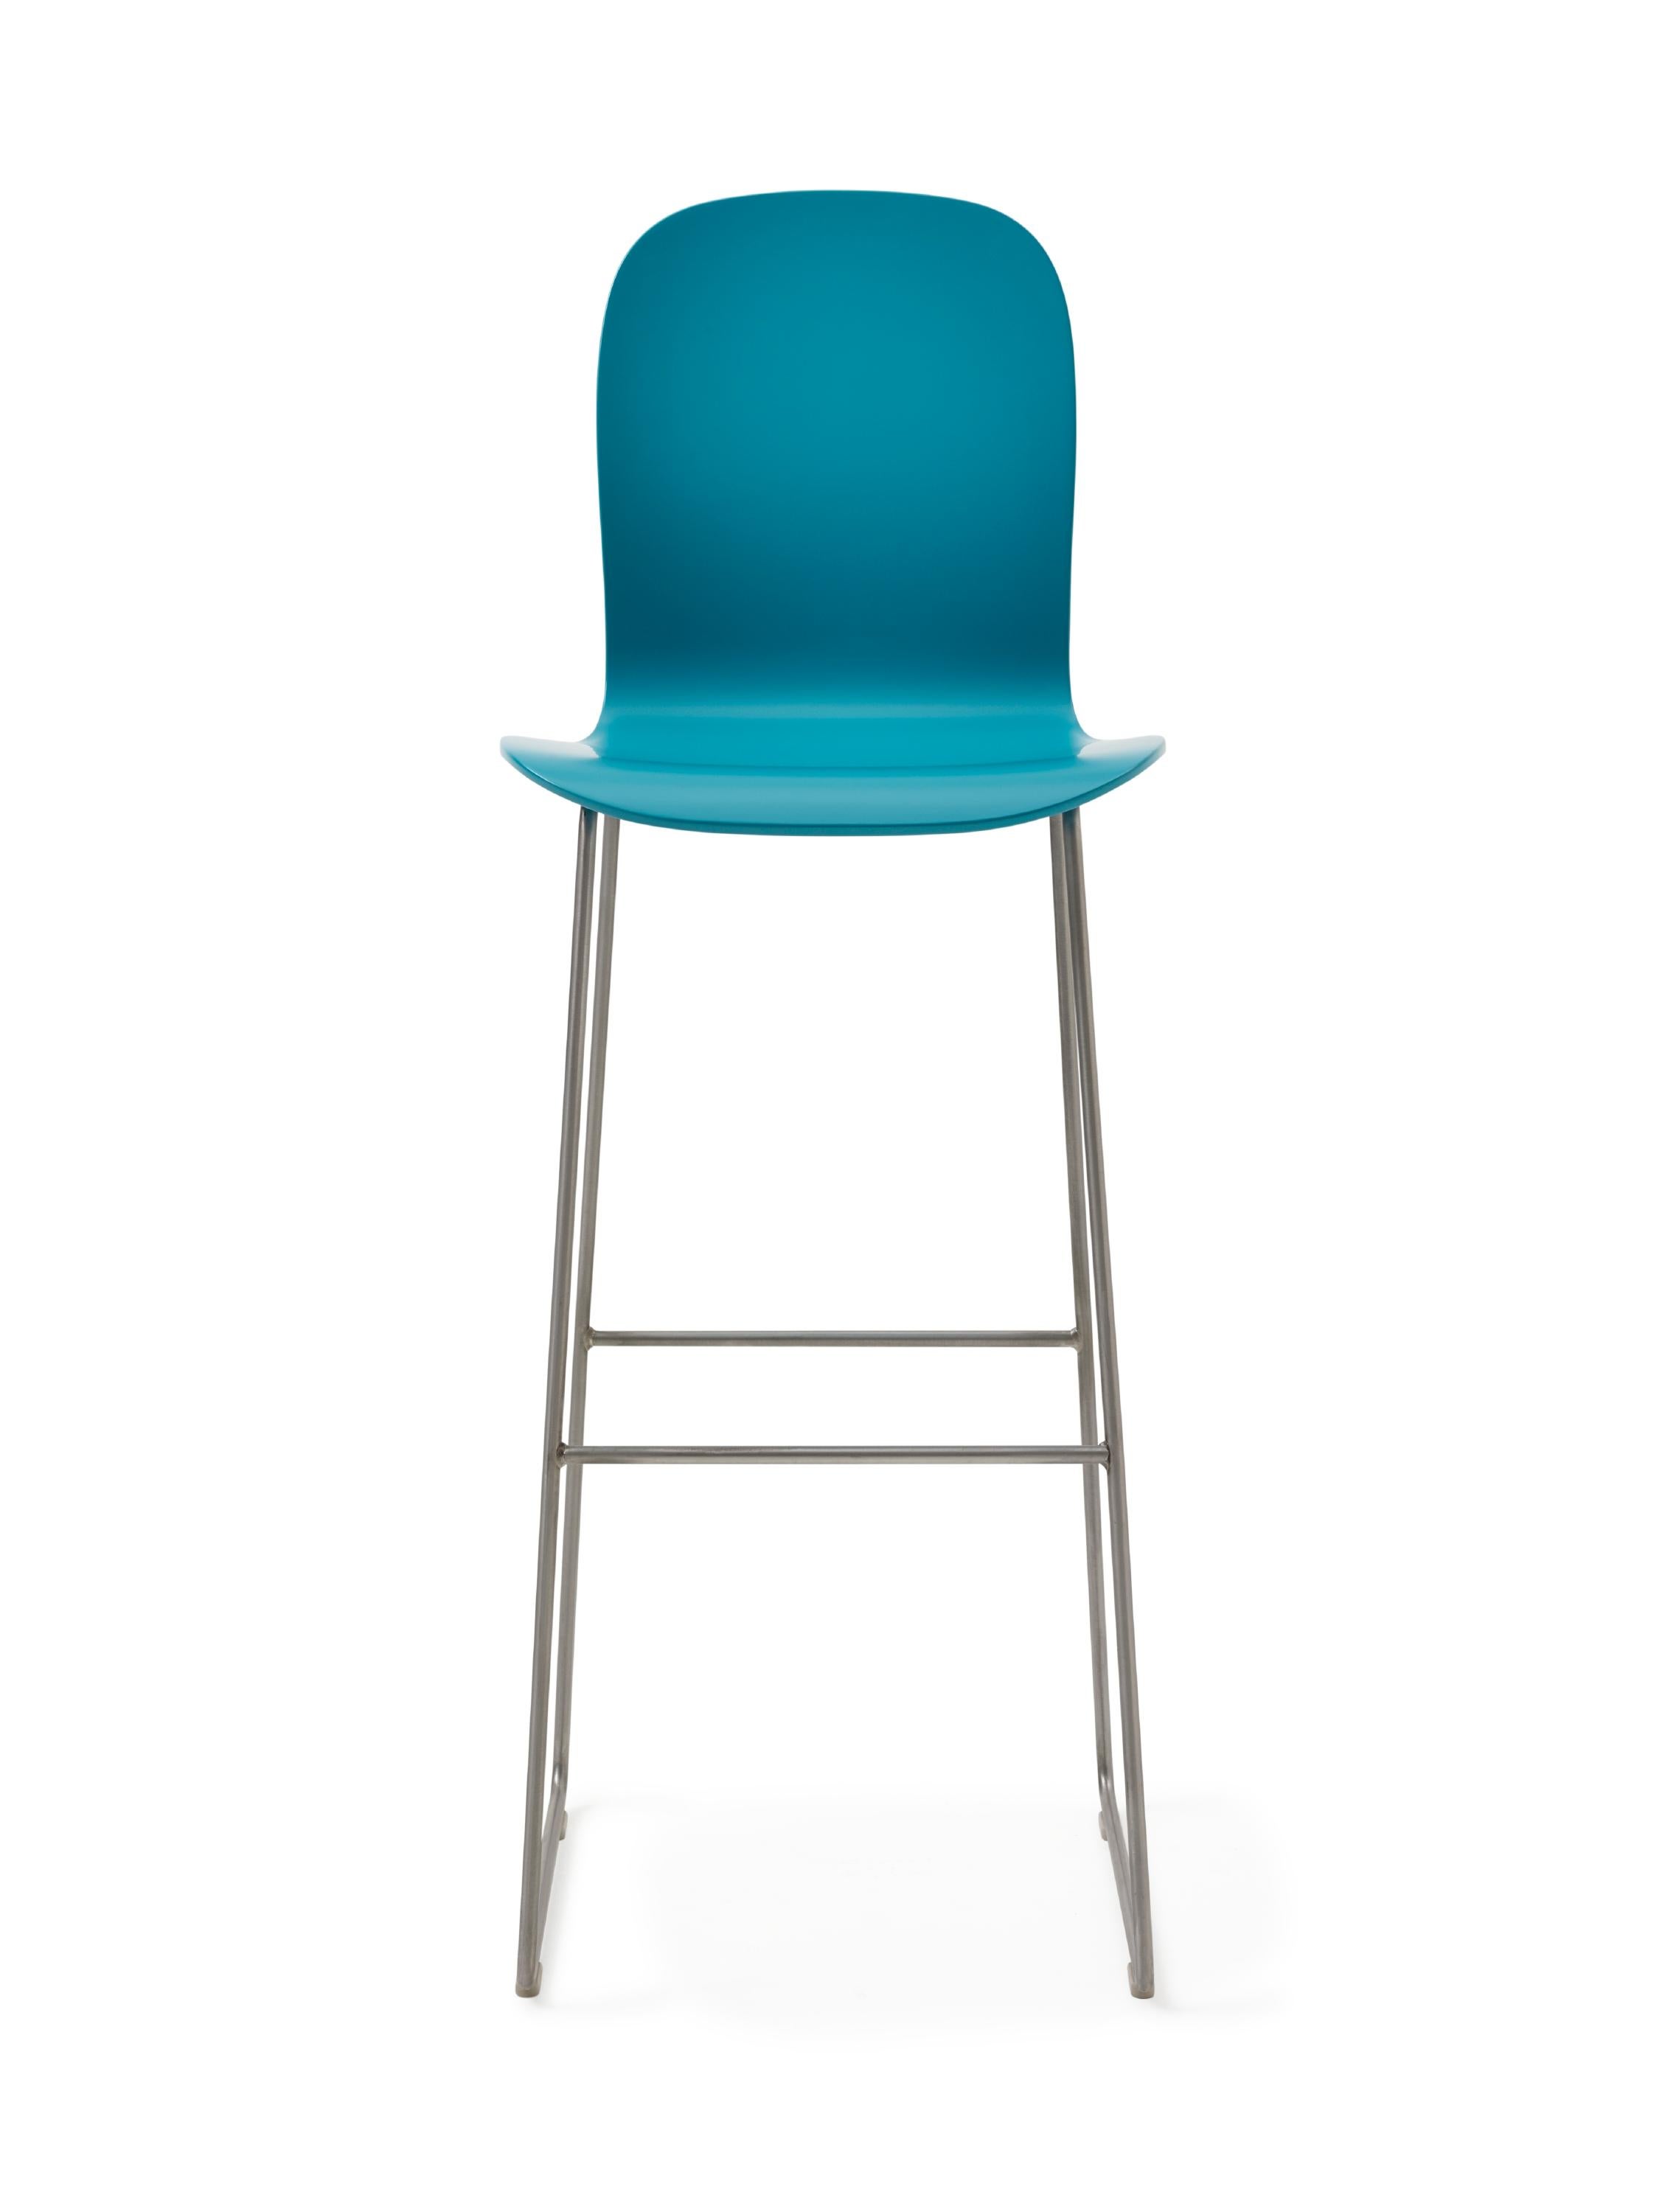 For Sale: Blue (77_PETROL BLUE) Jasper Morrison Tate Stool in Beech Plywood with Matte Lacquer for Cappellini 2